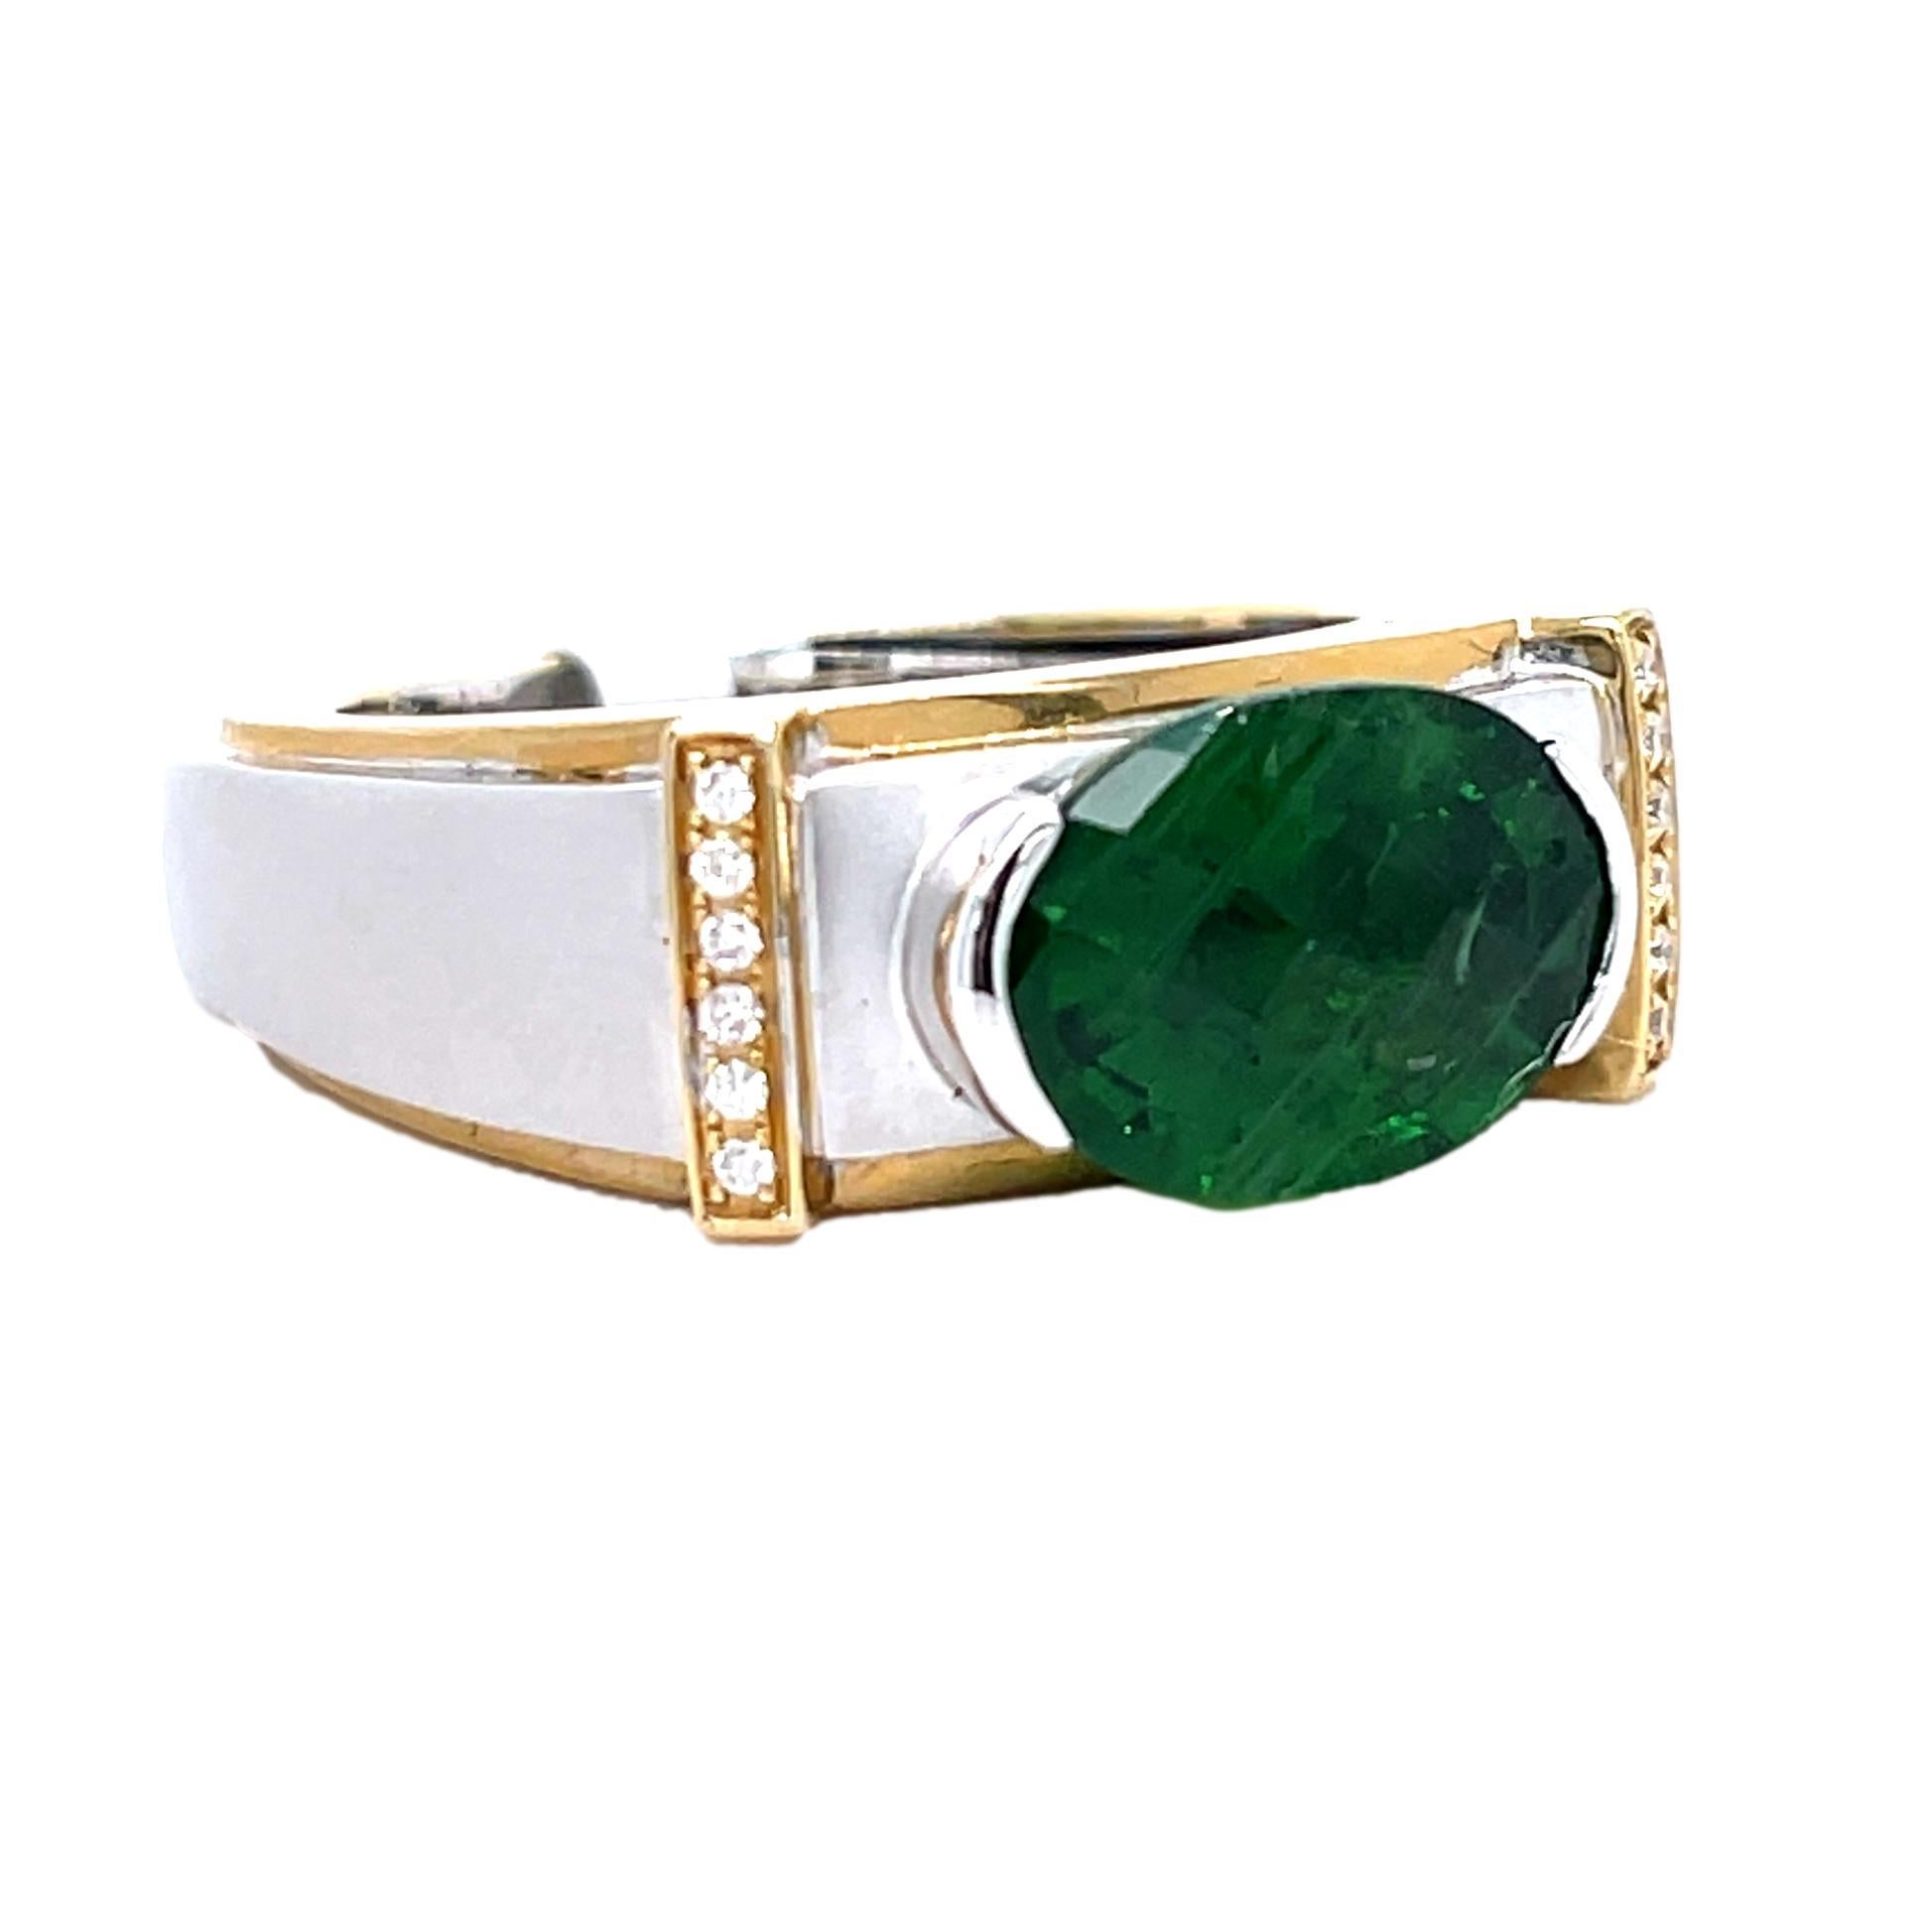 This unique Two Tone Men's ring has a sparkling checkerboard oval Tsavorite center with brilliant cut diamonds on the side. The ring is set in 18K white and yellow gold. It comes in a beautiful box ready for the perfect gift!

18KWY:           